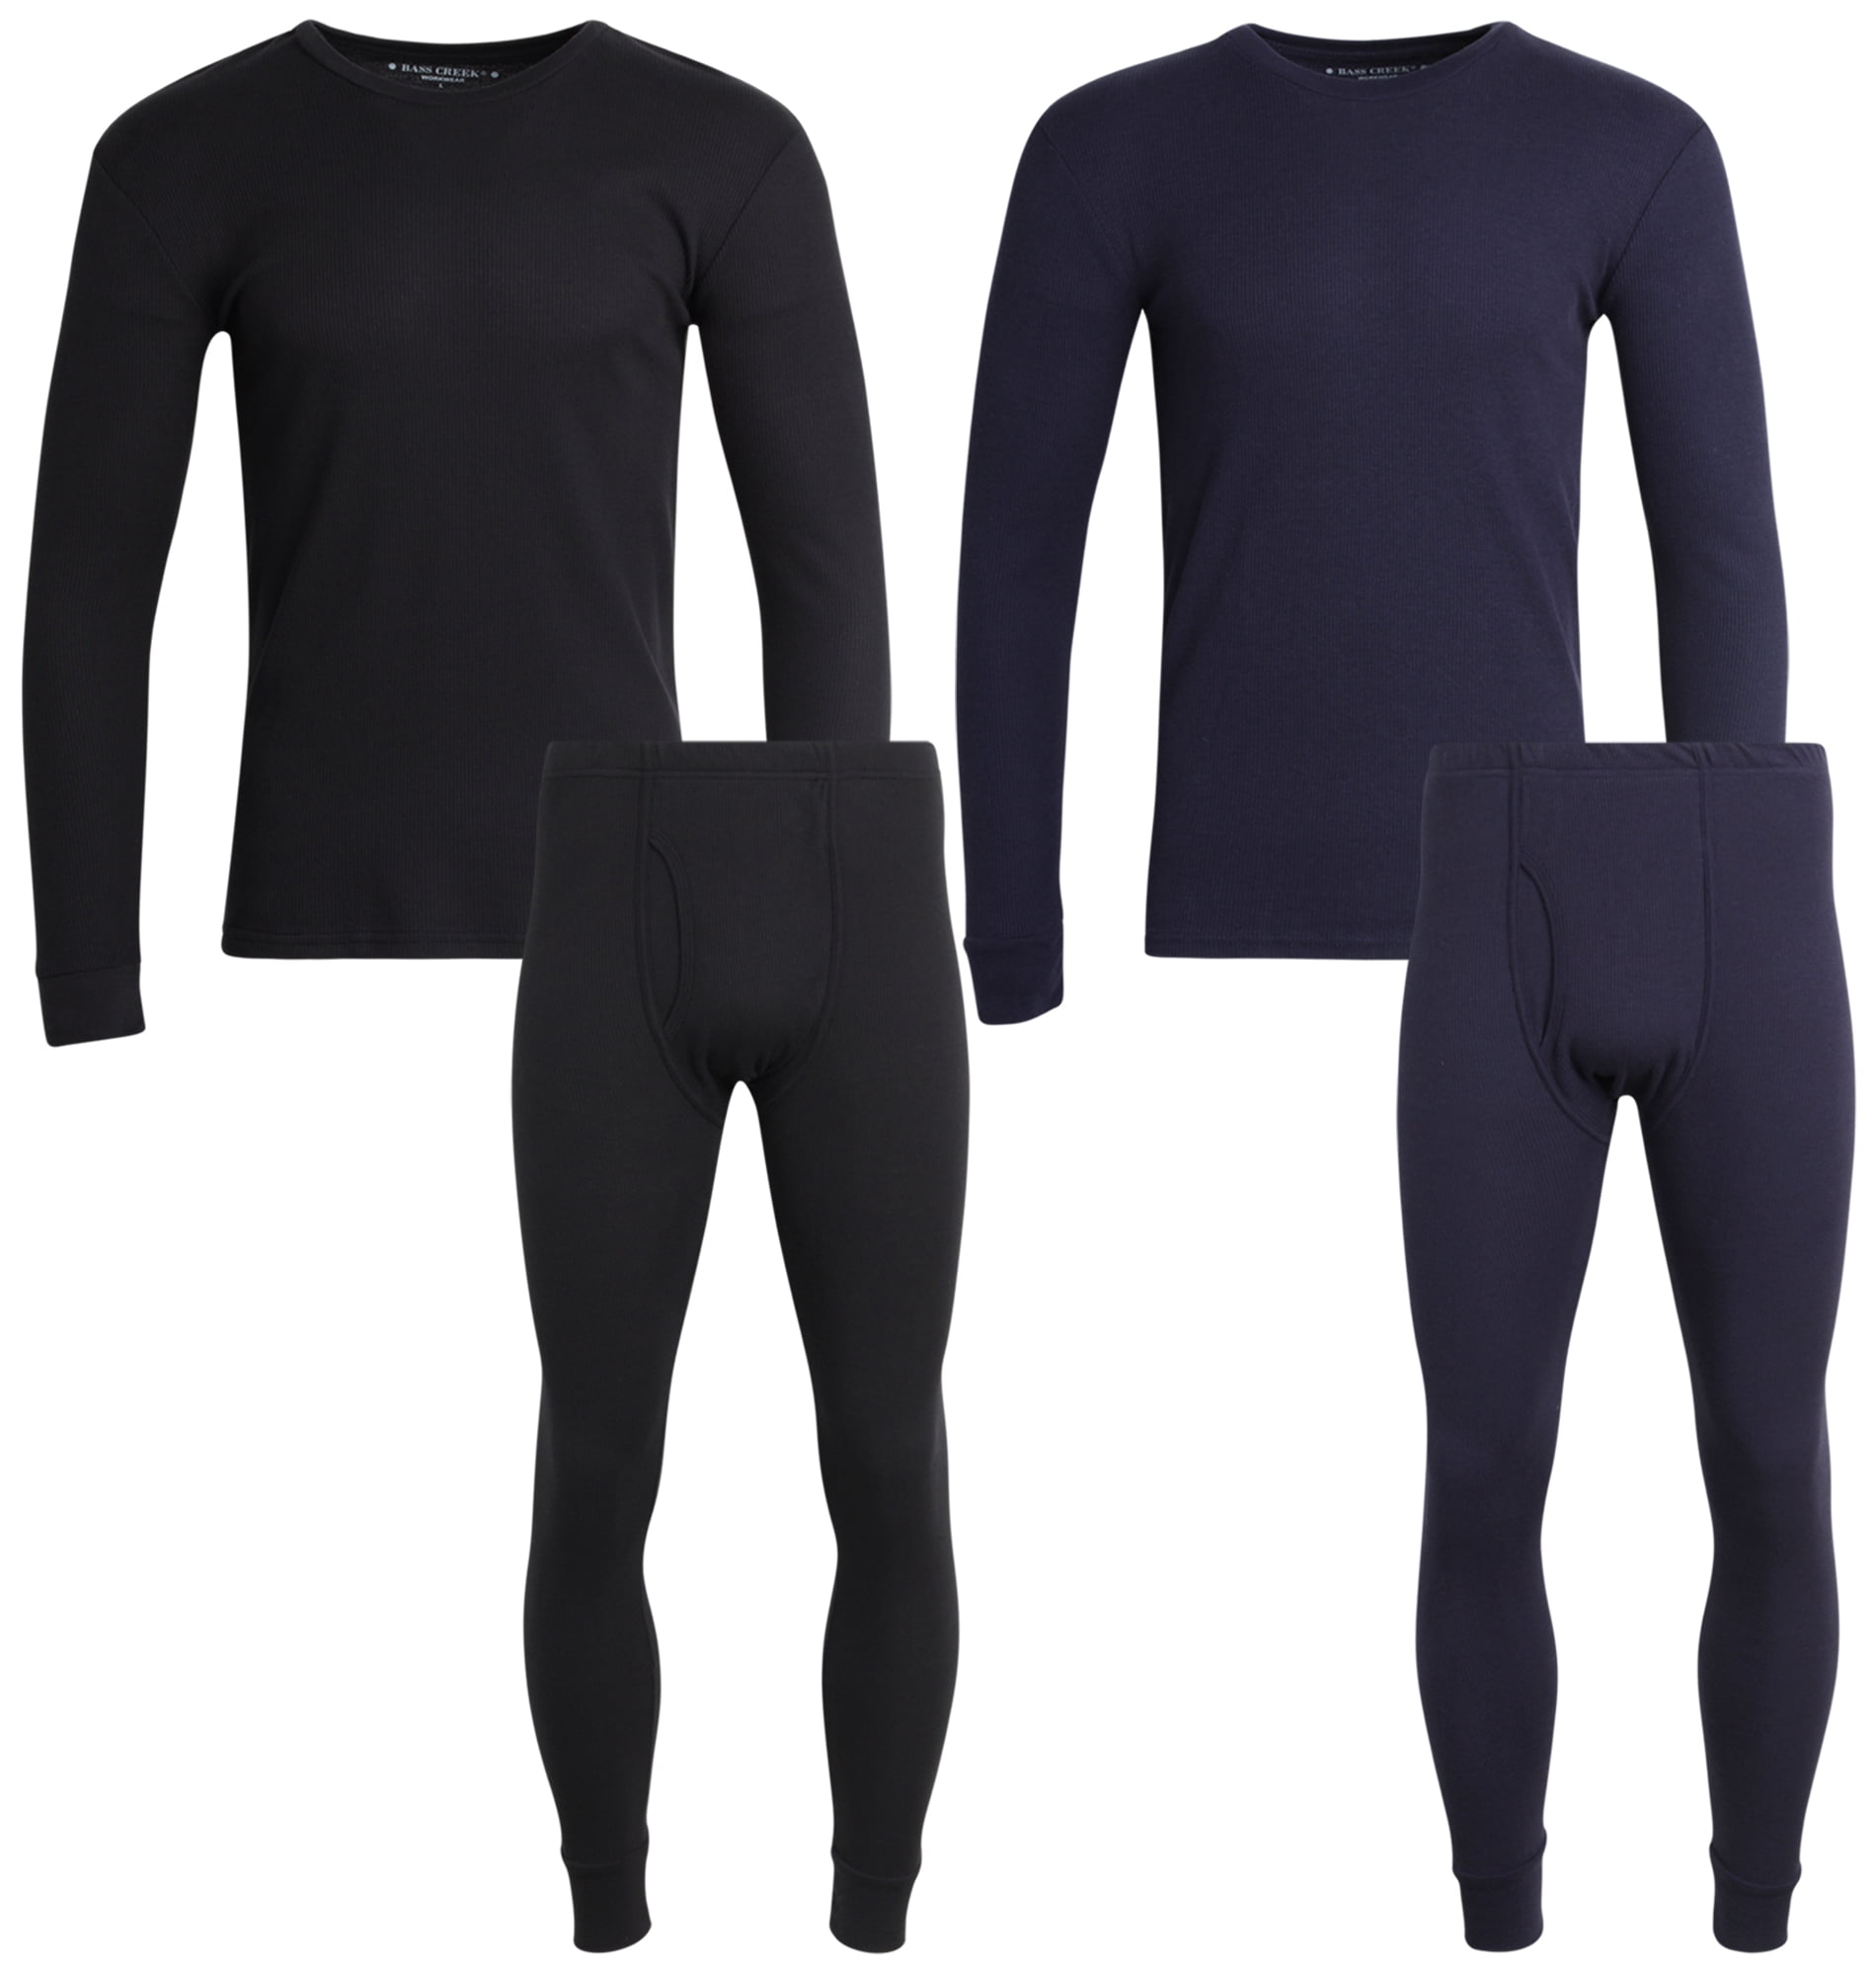 Bass Creek Outfitters Men's Thermal Underwear Set - 4 Piece Waffle Knit ...